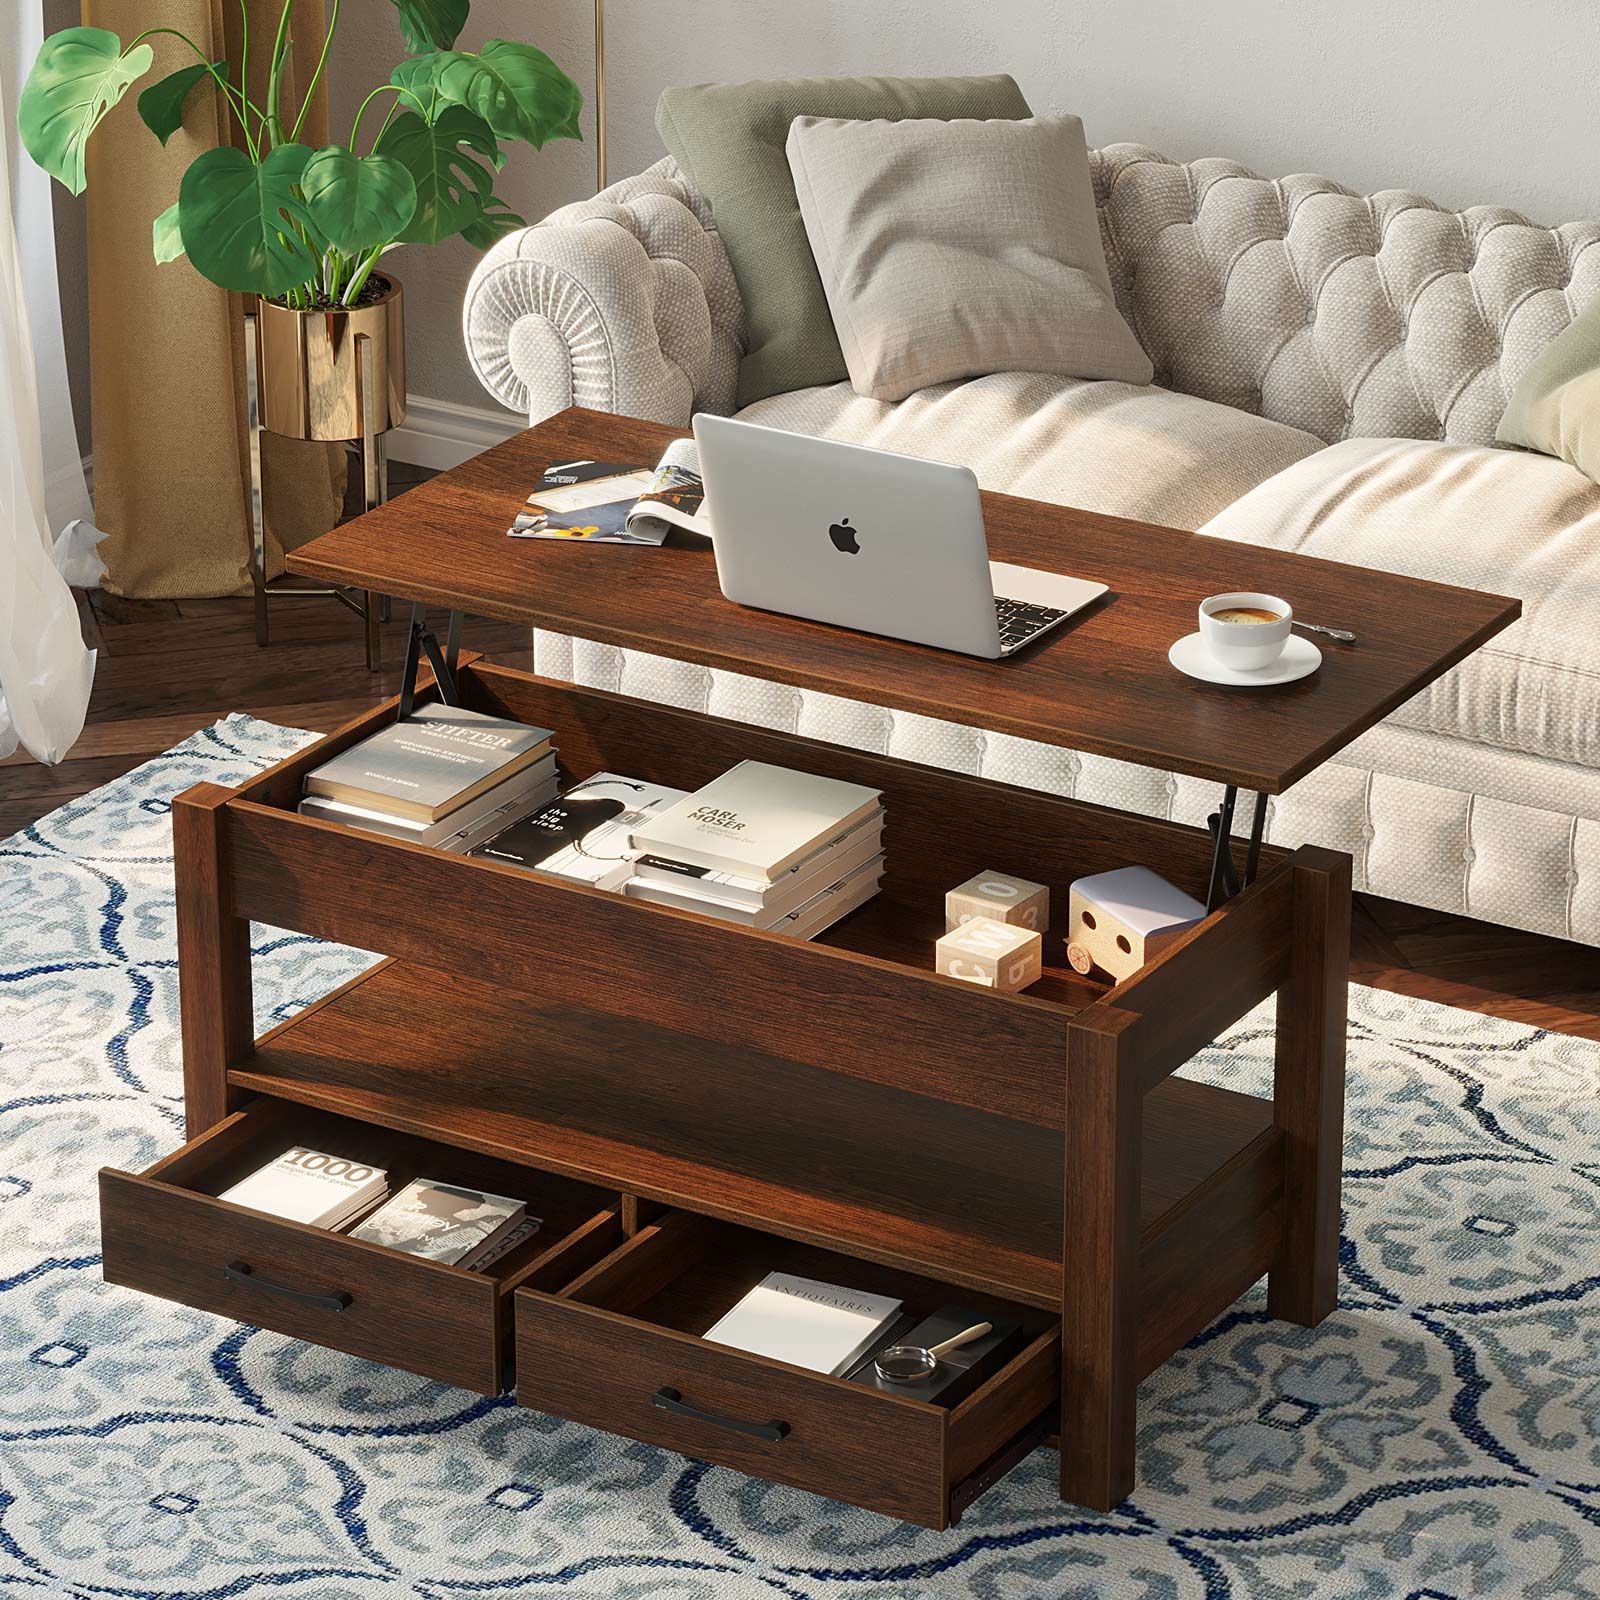 Rolanstar Coffee Table, Lift Top Coffee Table With Drawers And Hidden For Lift Top Coffee Tables With Shelves (View 16 of 20)